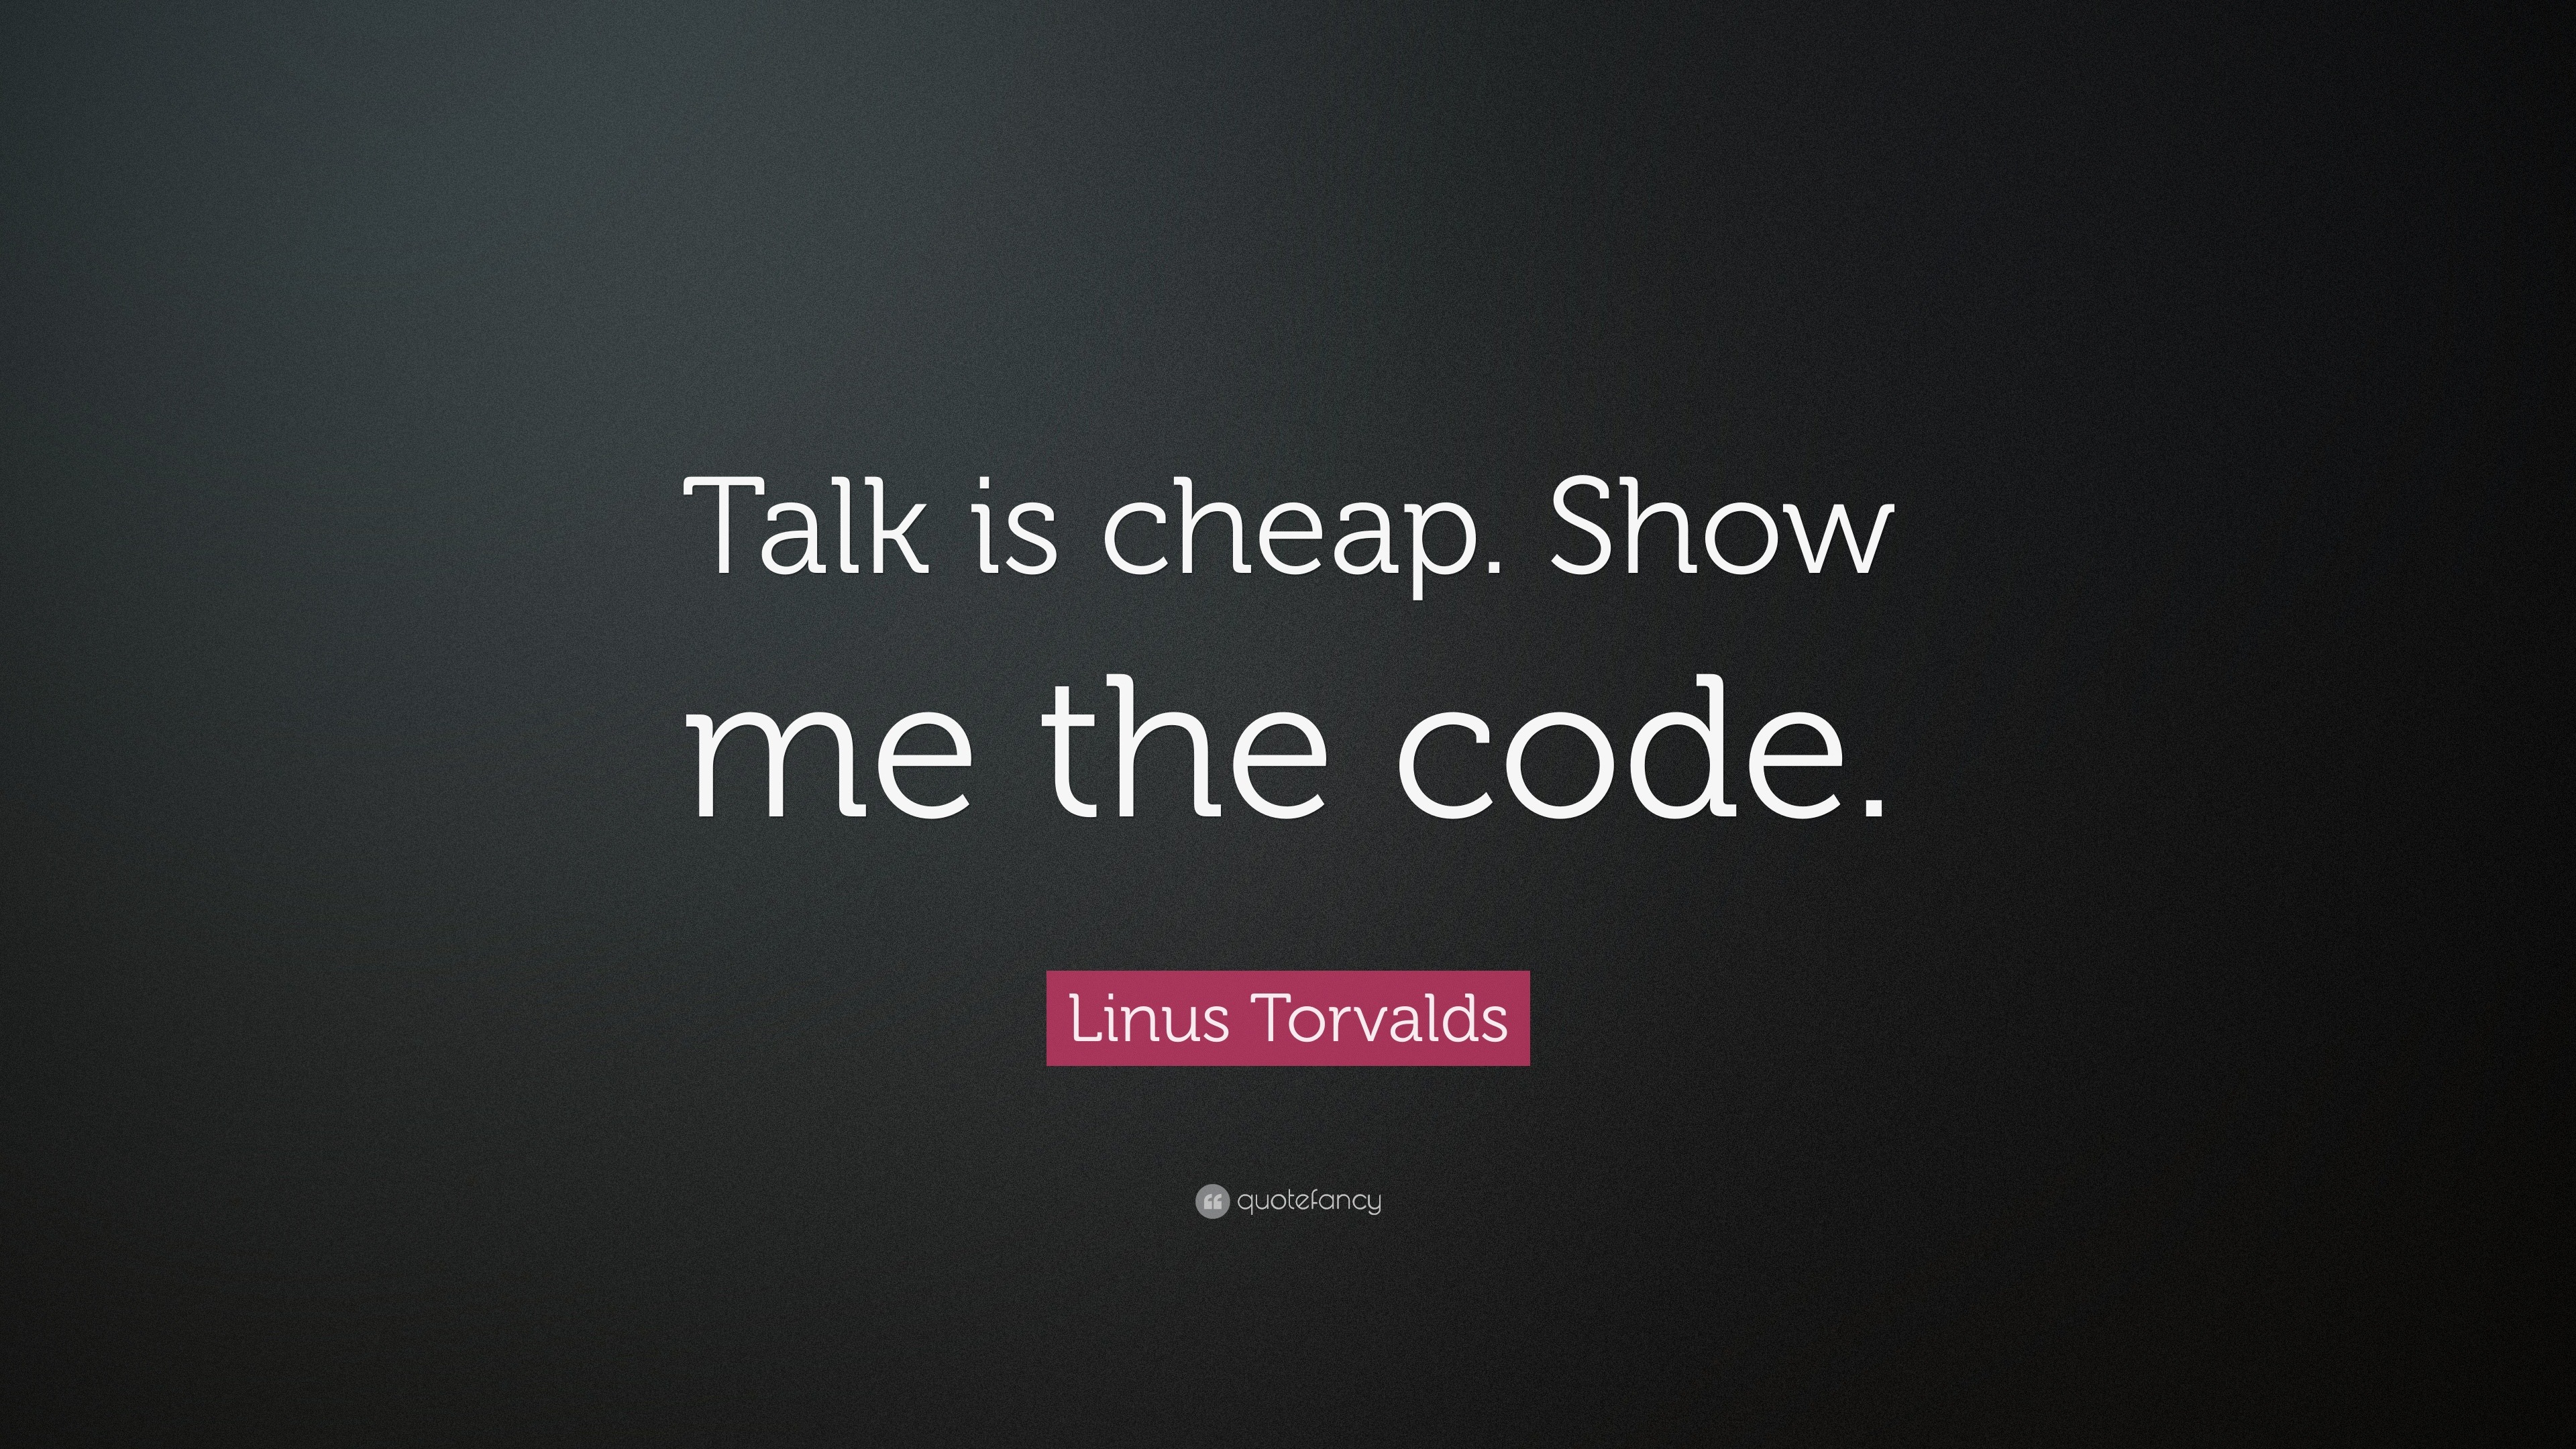 linus torvalds quote “talk is cheap. show me the code on talk is cheap show me the code wallpapers